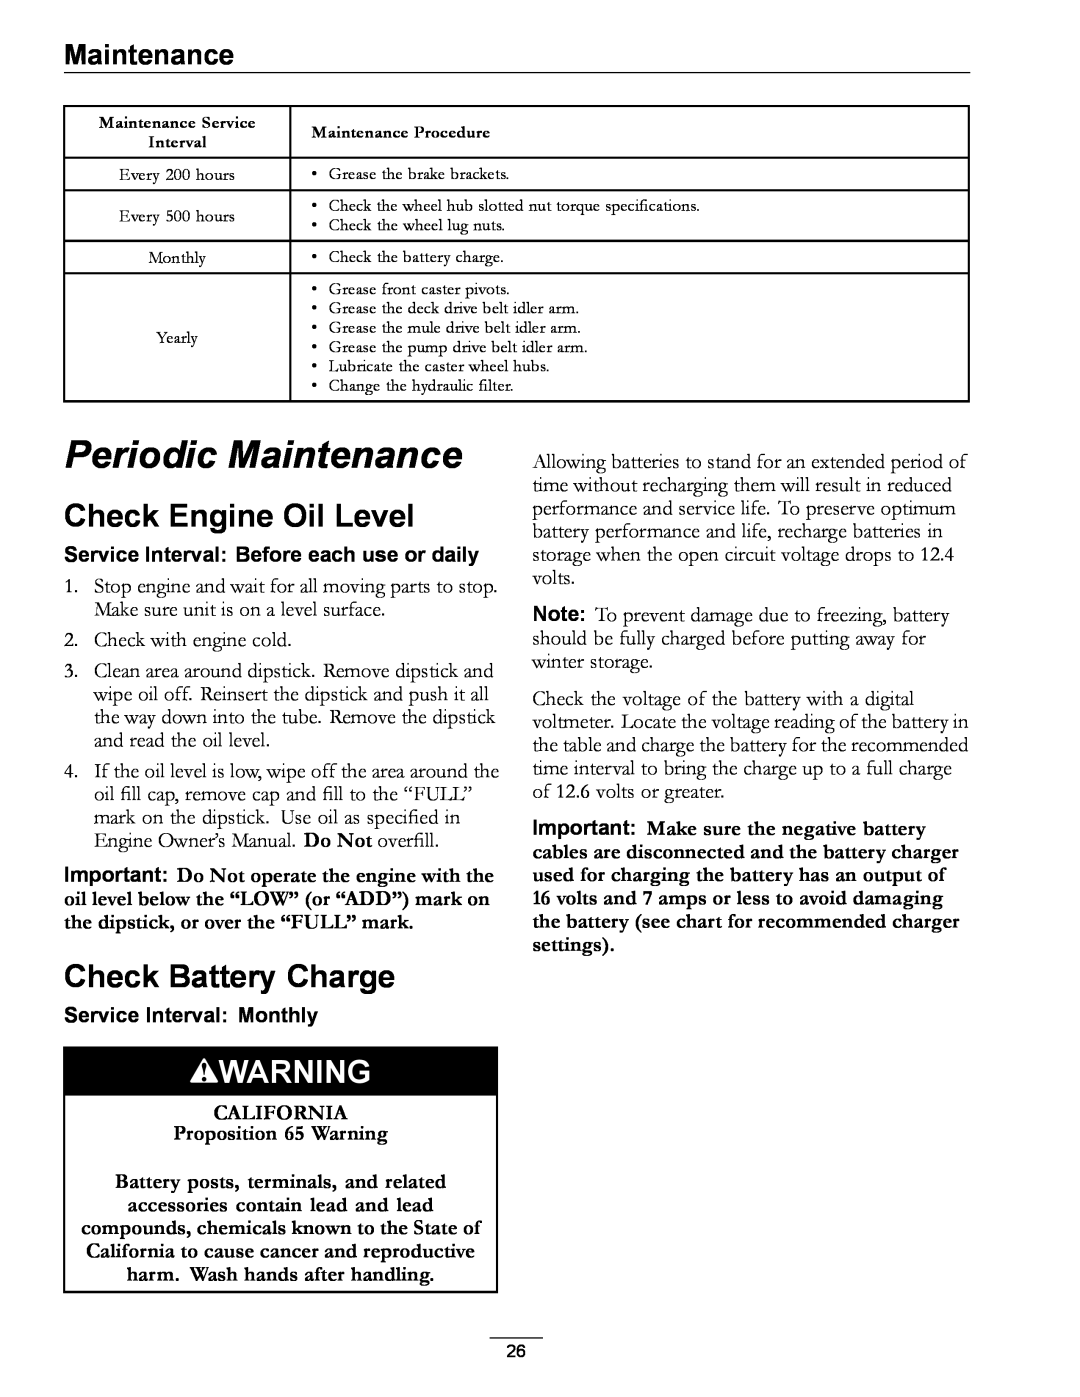 Exmark LZ27KC604 manual Periodic Maintenance, Check Engine Oil Level, Check Battery Charge, Service Interval Monthly 